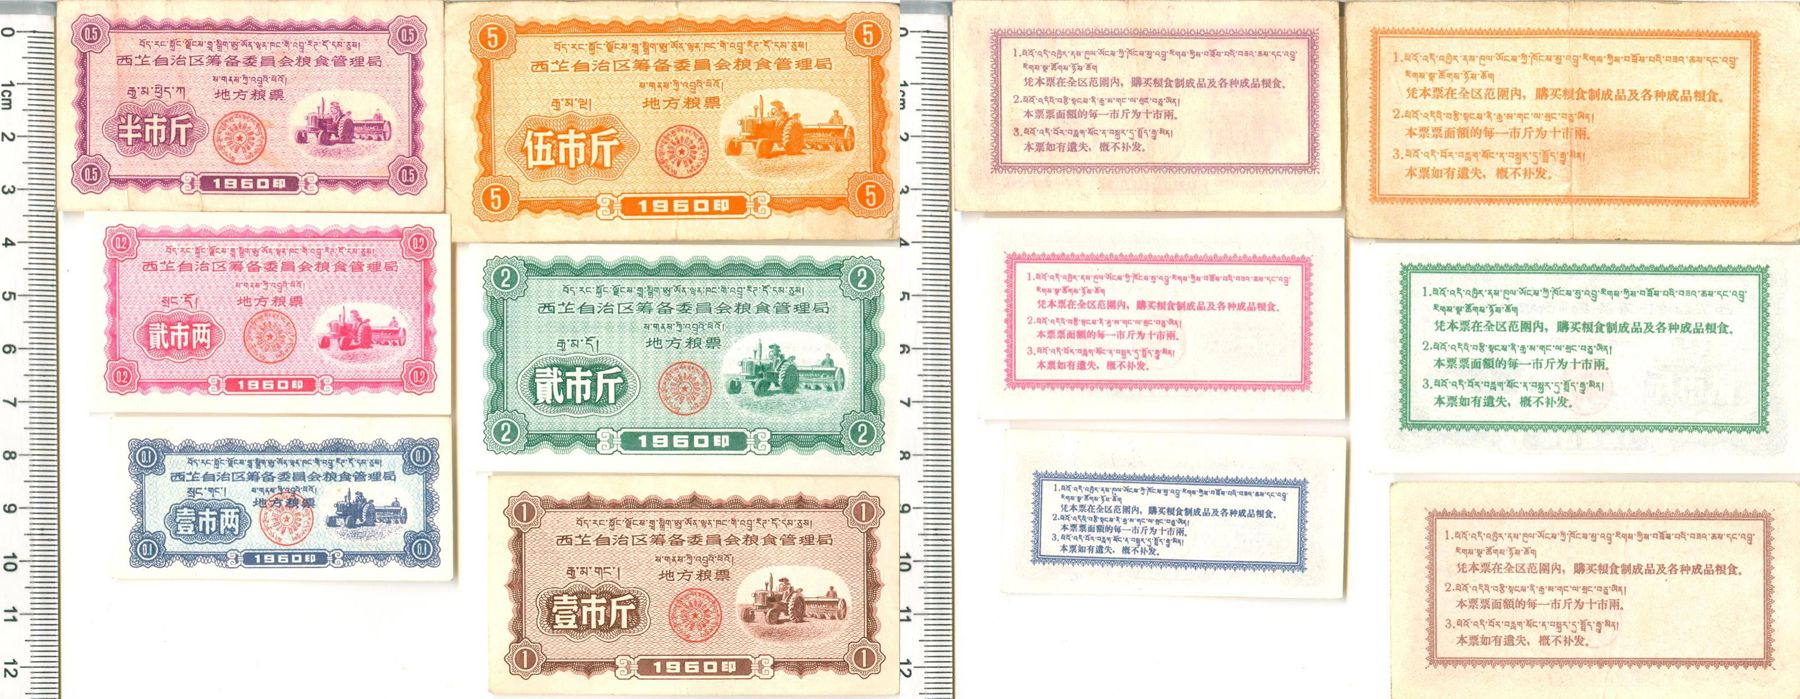 H7020, Tibet First Issue Food Ration Coupons, 6 Pcs, 1960 Rare